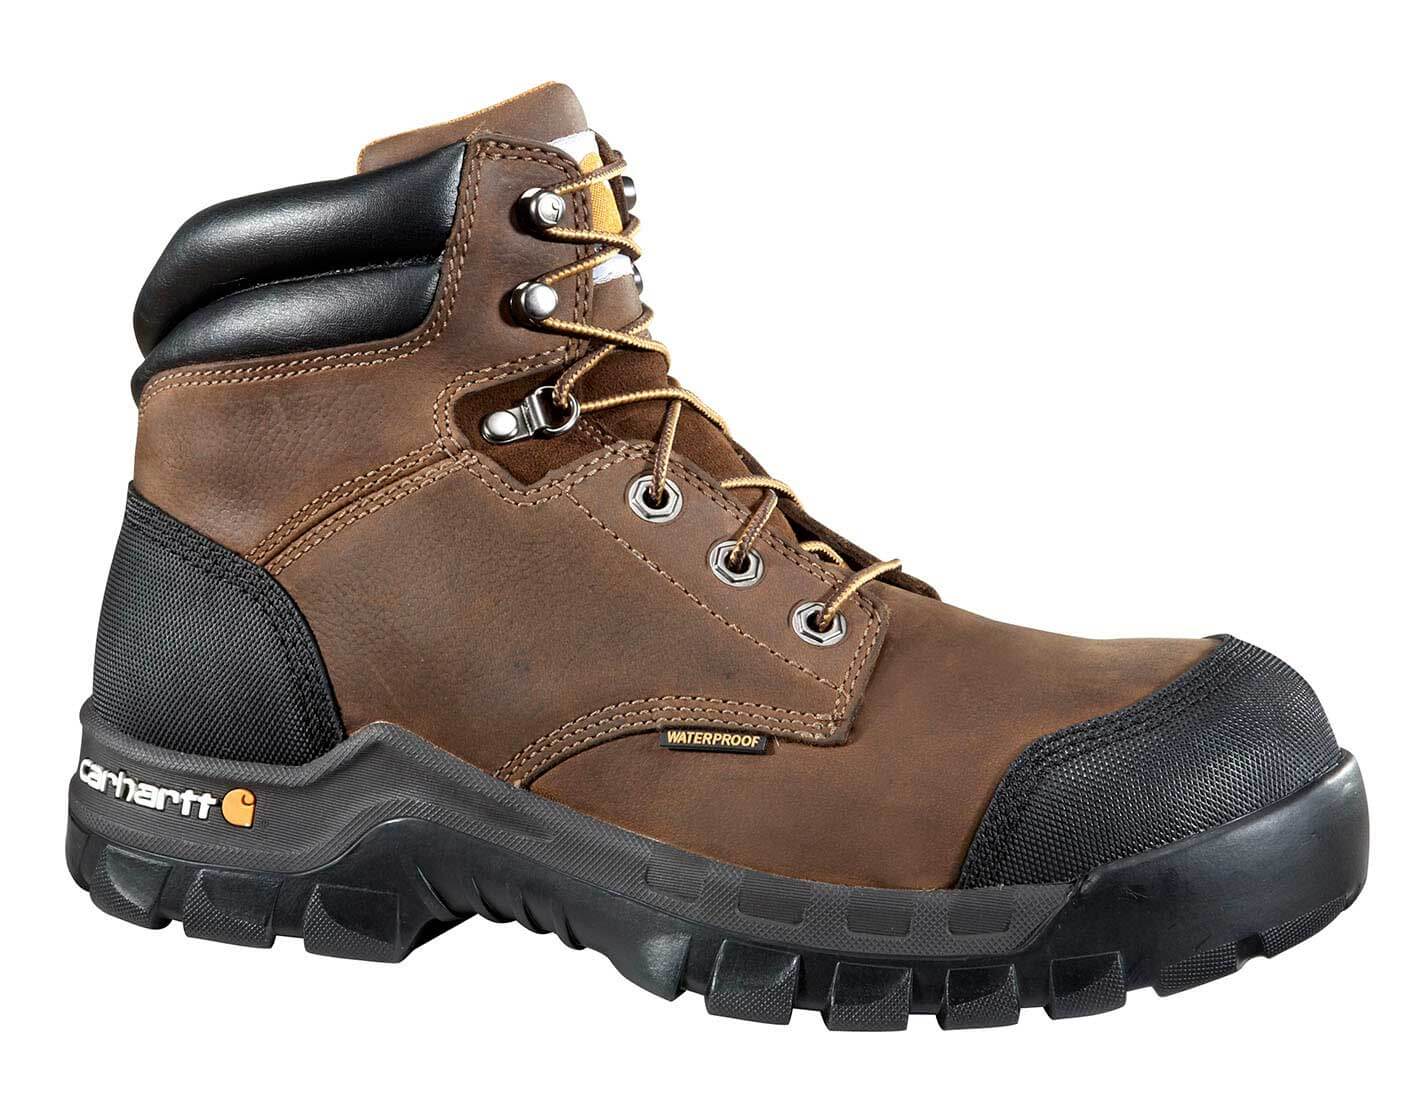 Carhartt - CMF6380 - Rugged Flex Men's Brown Leather Waterproof Composite Safety Toe 6 Lace-up Work Boot